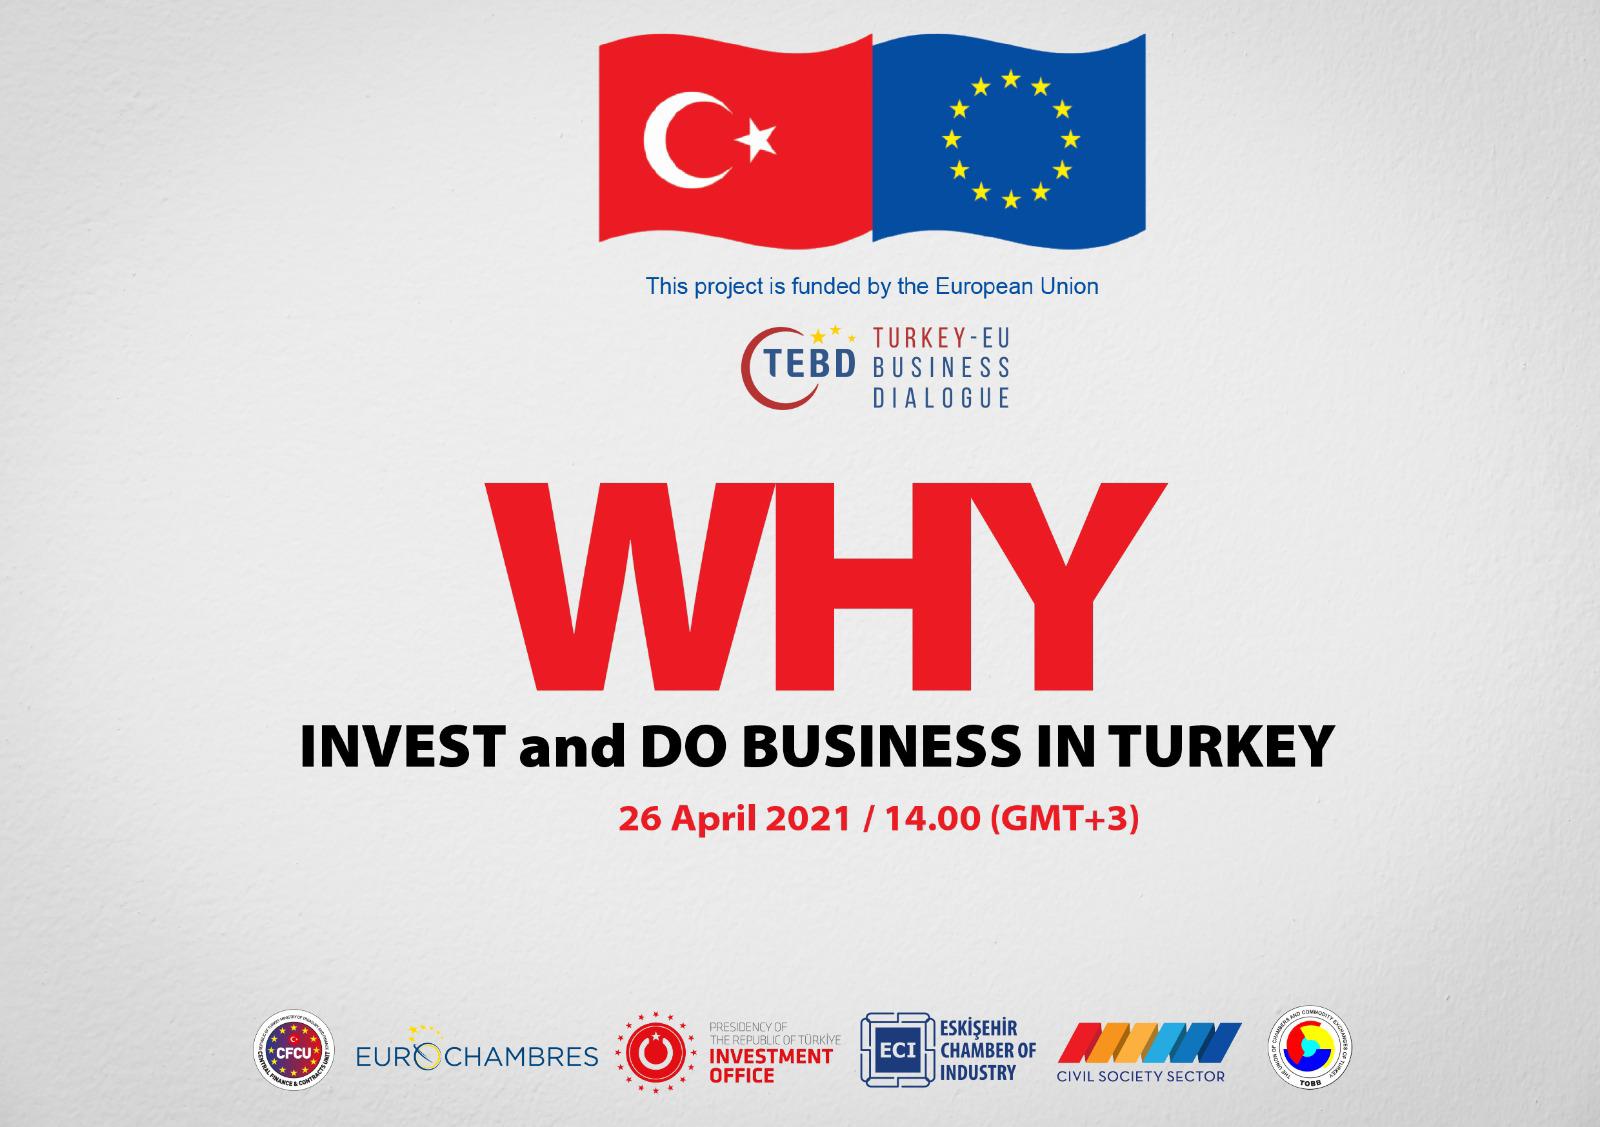 INVESTING AND DOING BUSINESS IN TURKEY